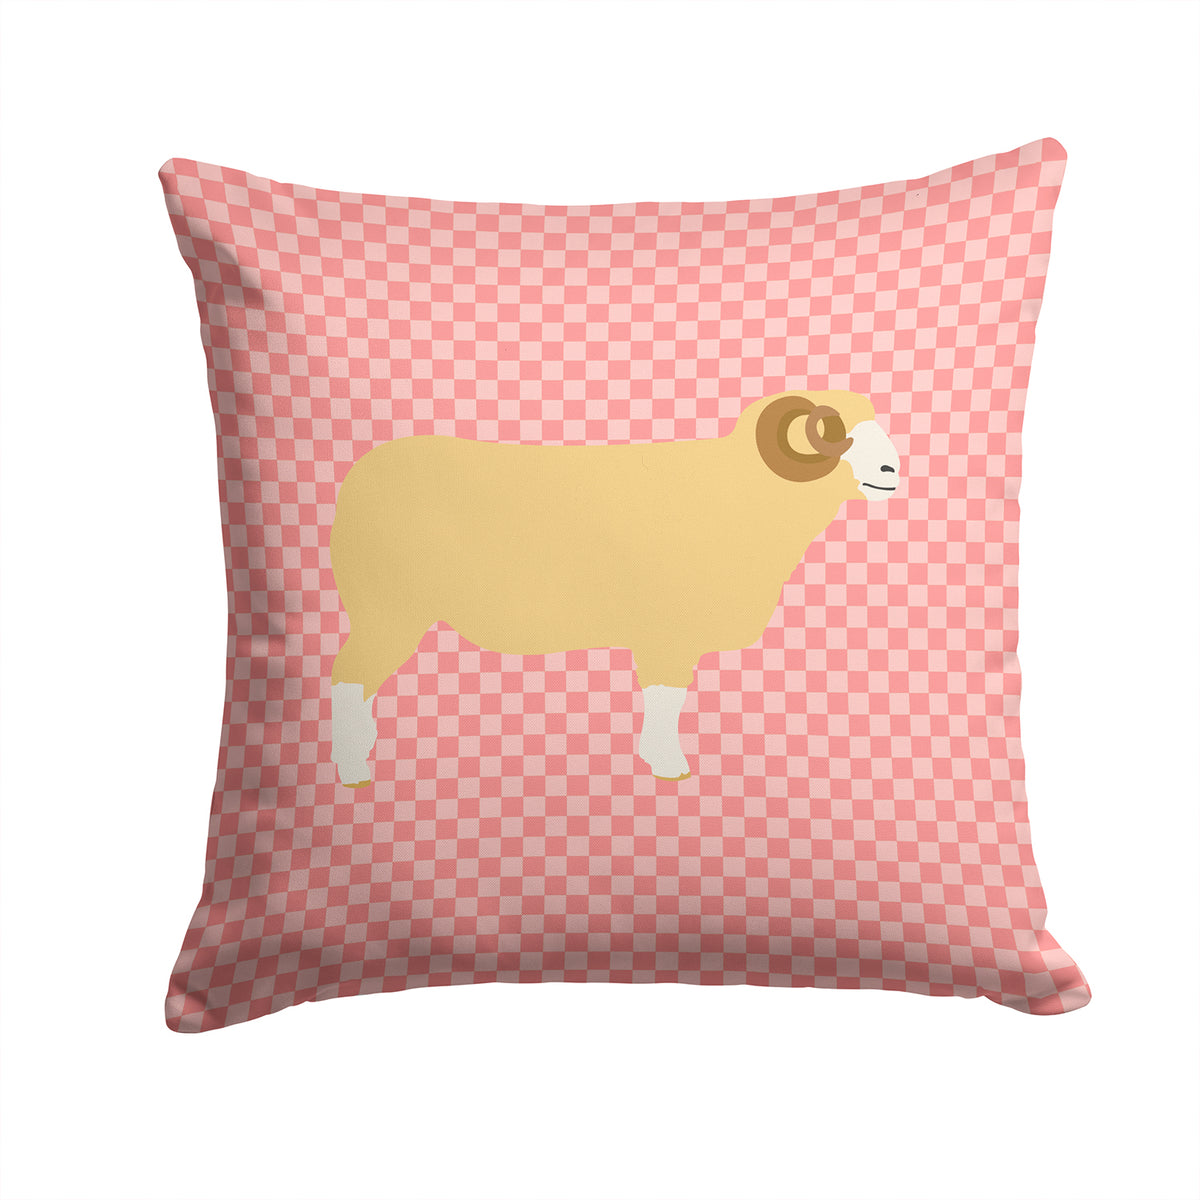 Horned Dorset Sheep Pink Check Fabric Decorative Pillow BB7980PW1414 - the-store.com